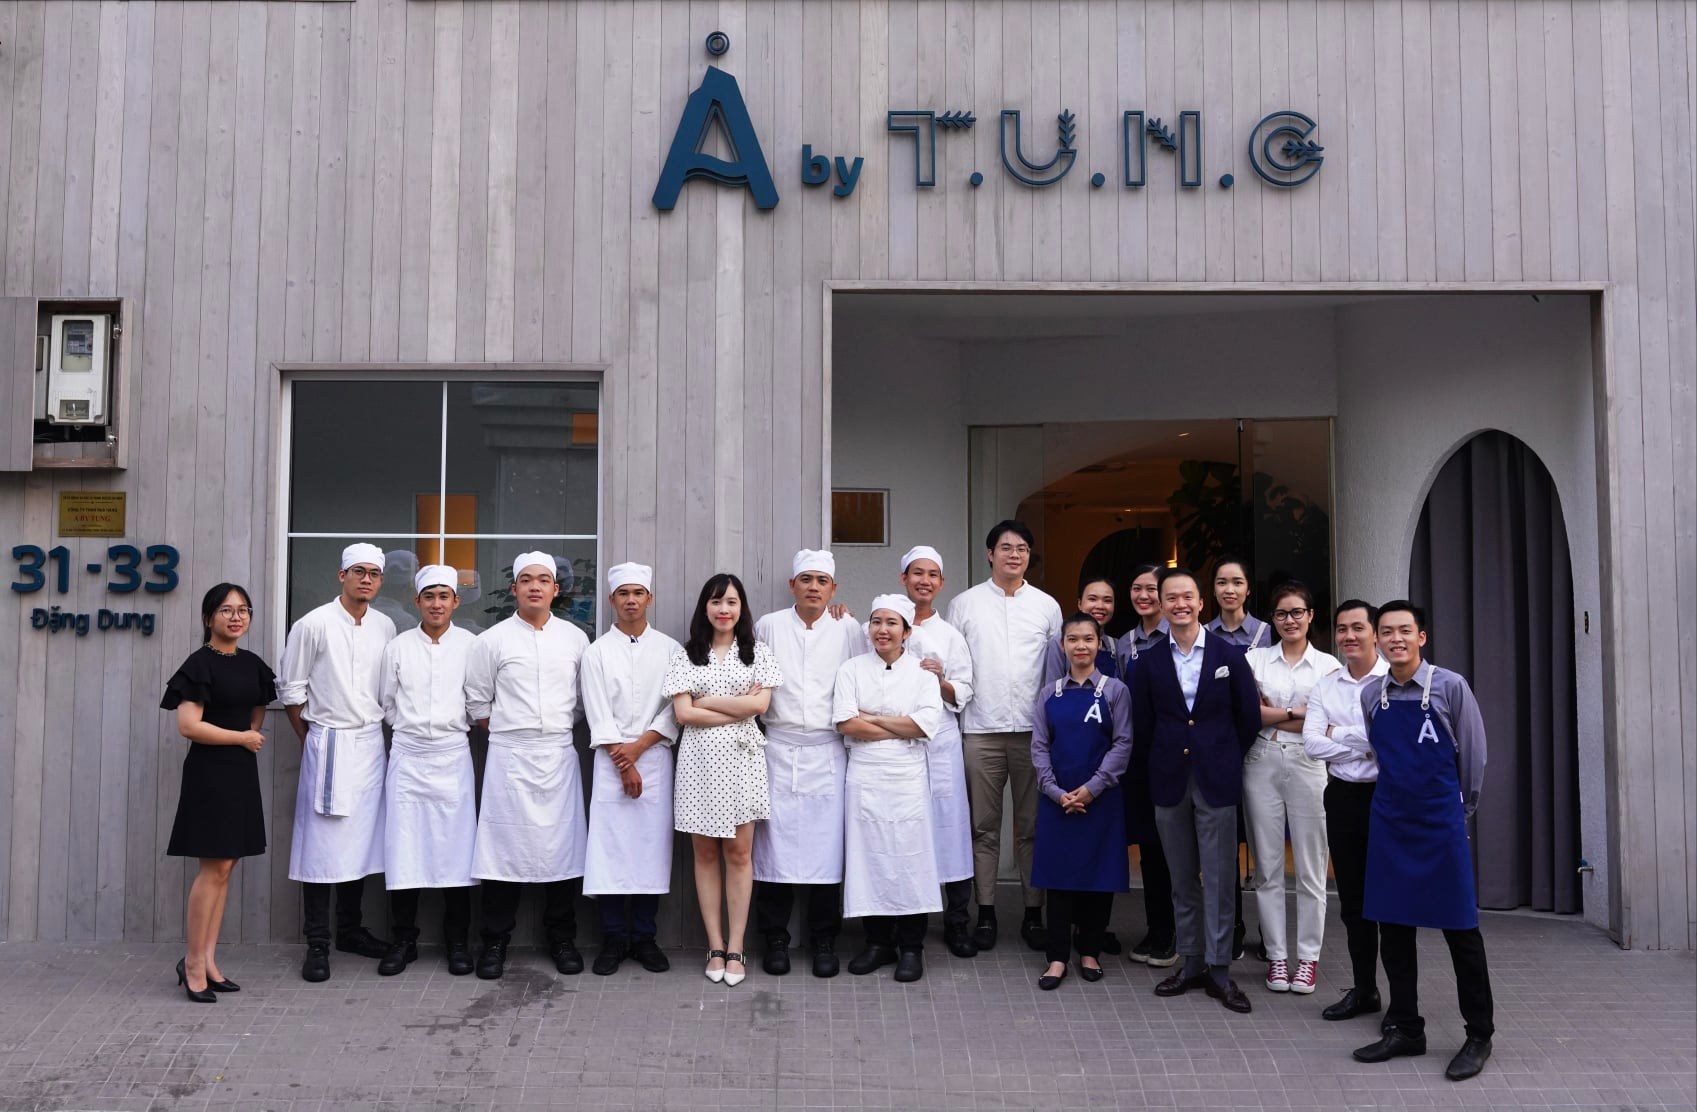 A by Tung - staff